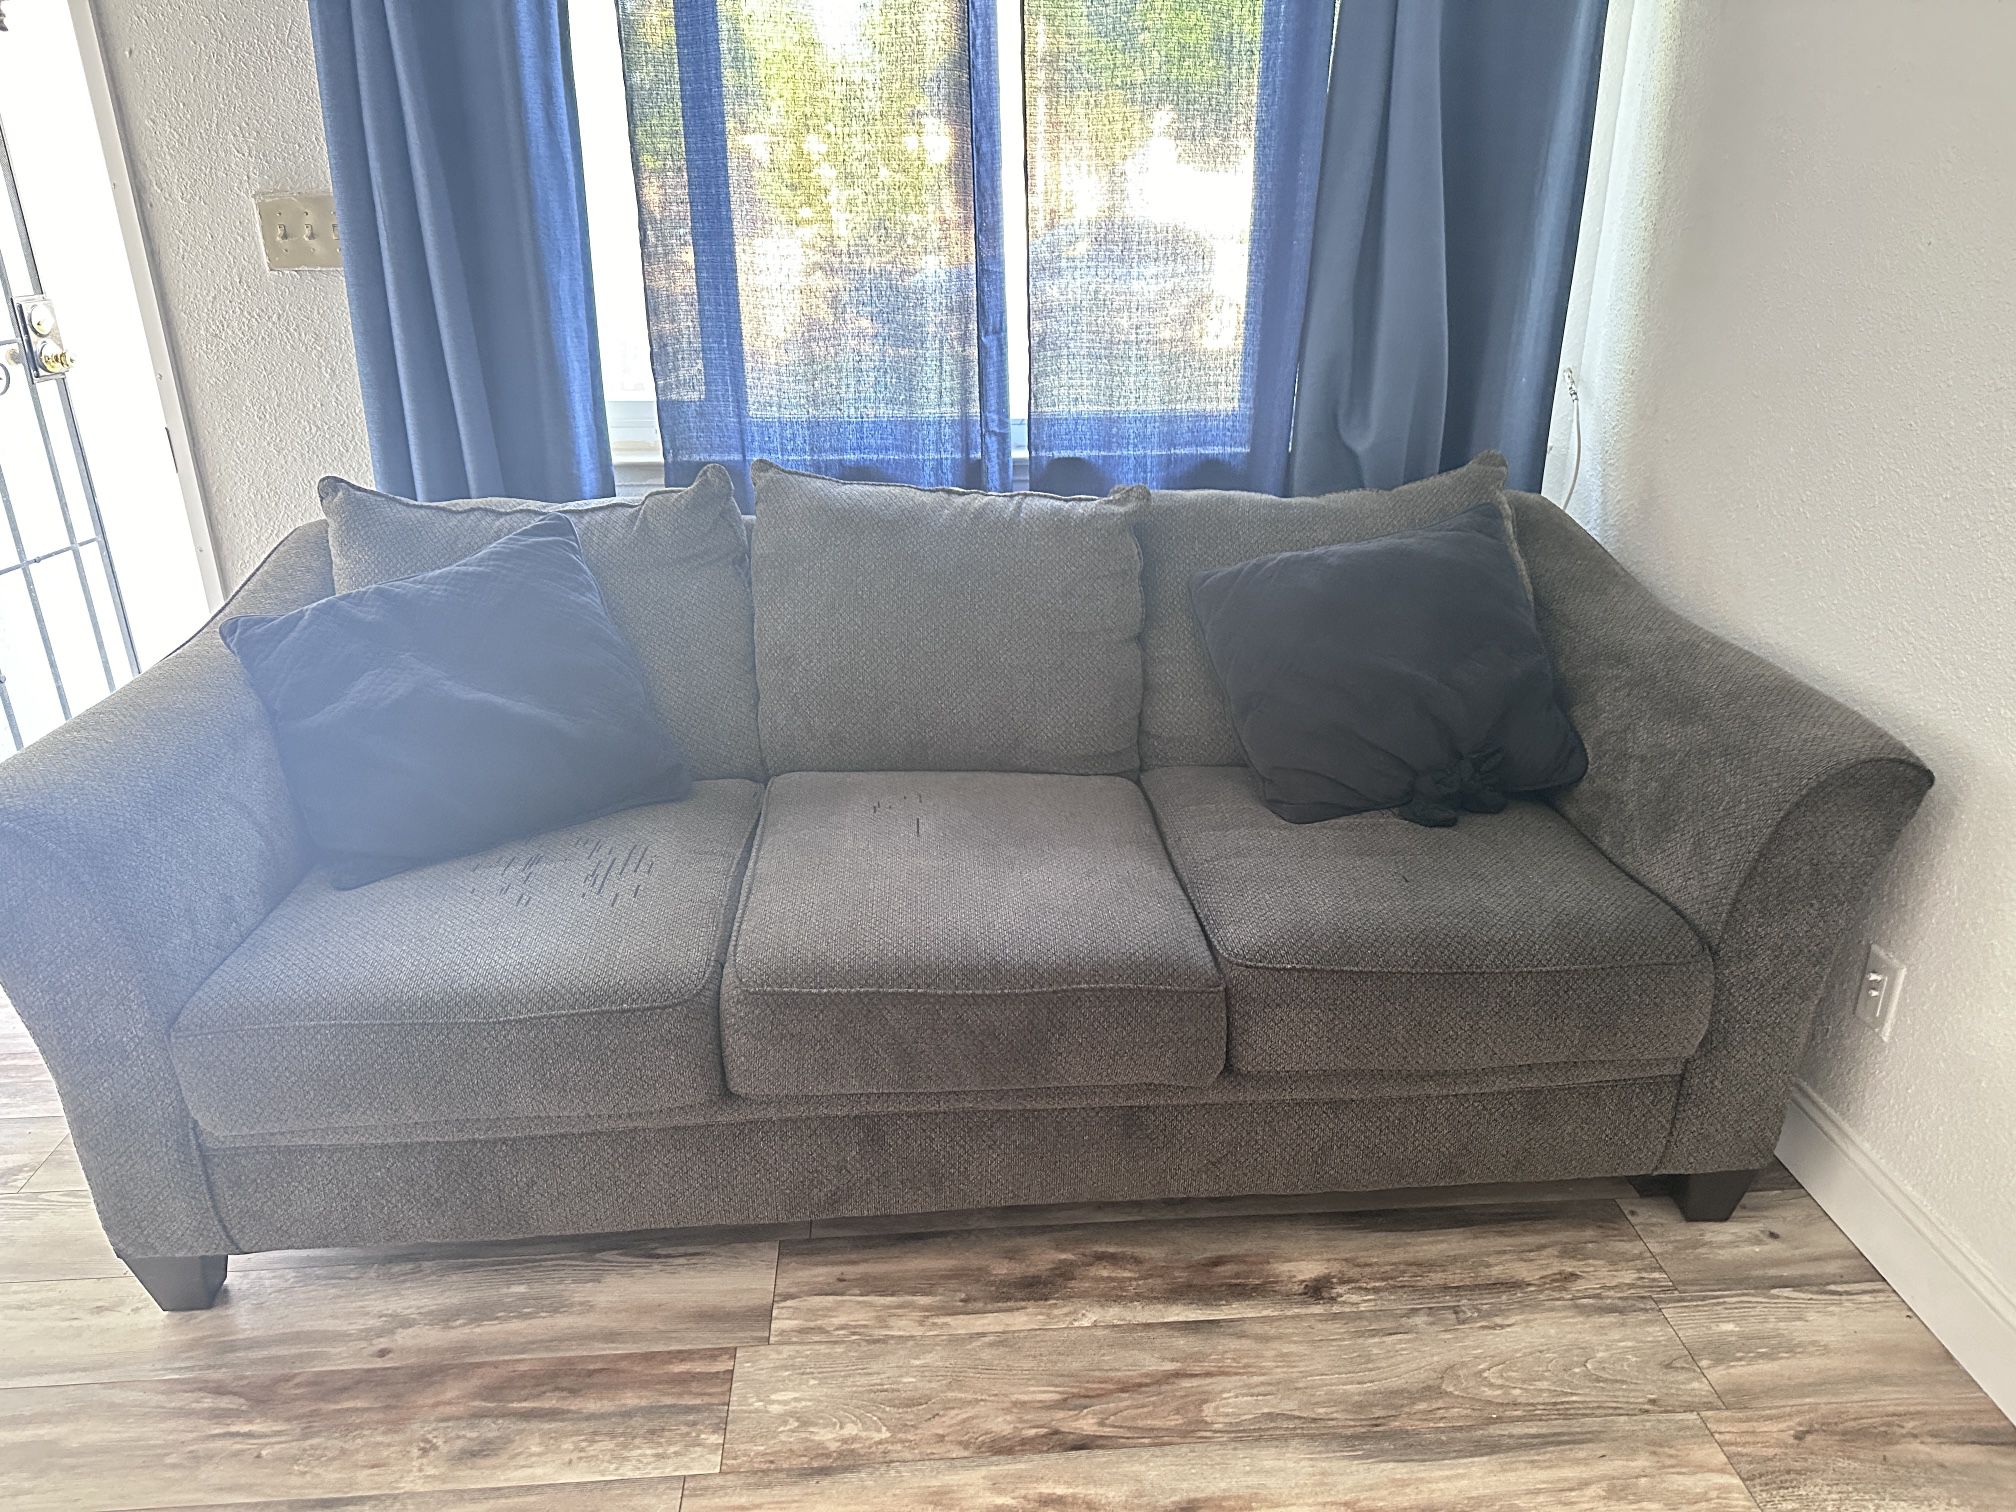 Grey Couch Or Best Offer 